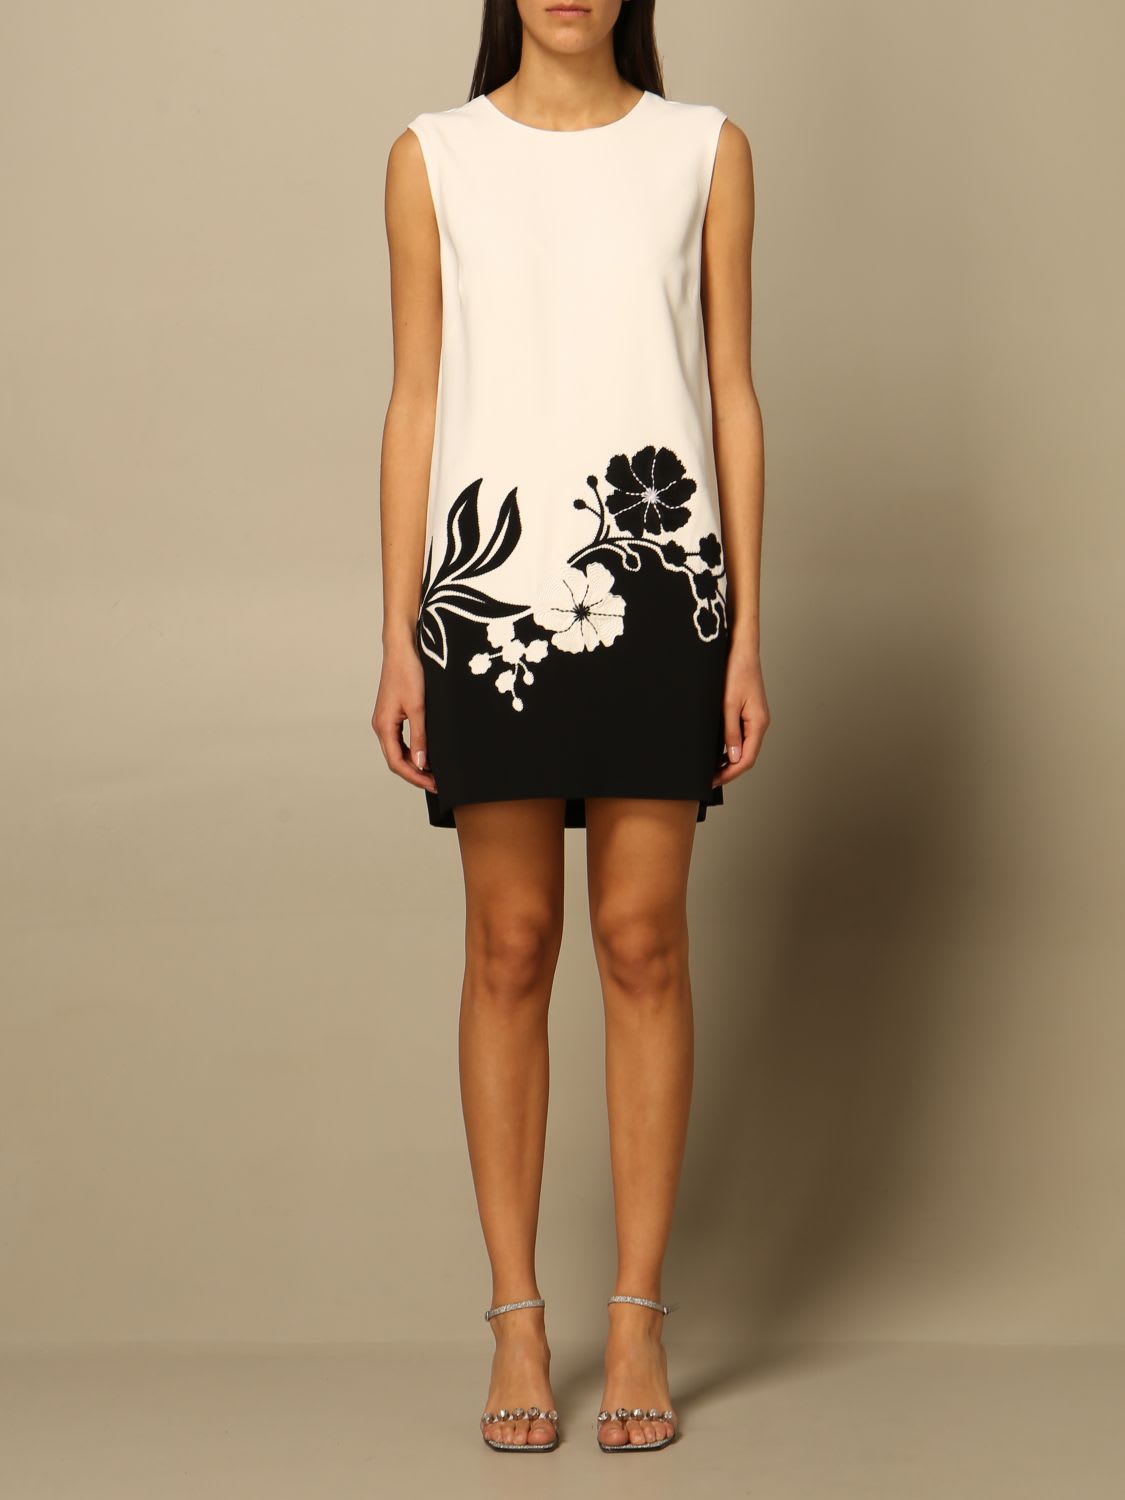 Ermanno Scervino Dress Ermanno Scervino Dress In Viscose Blend With Floral Inlays